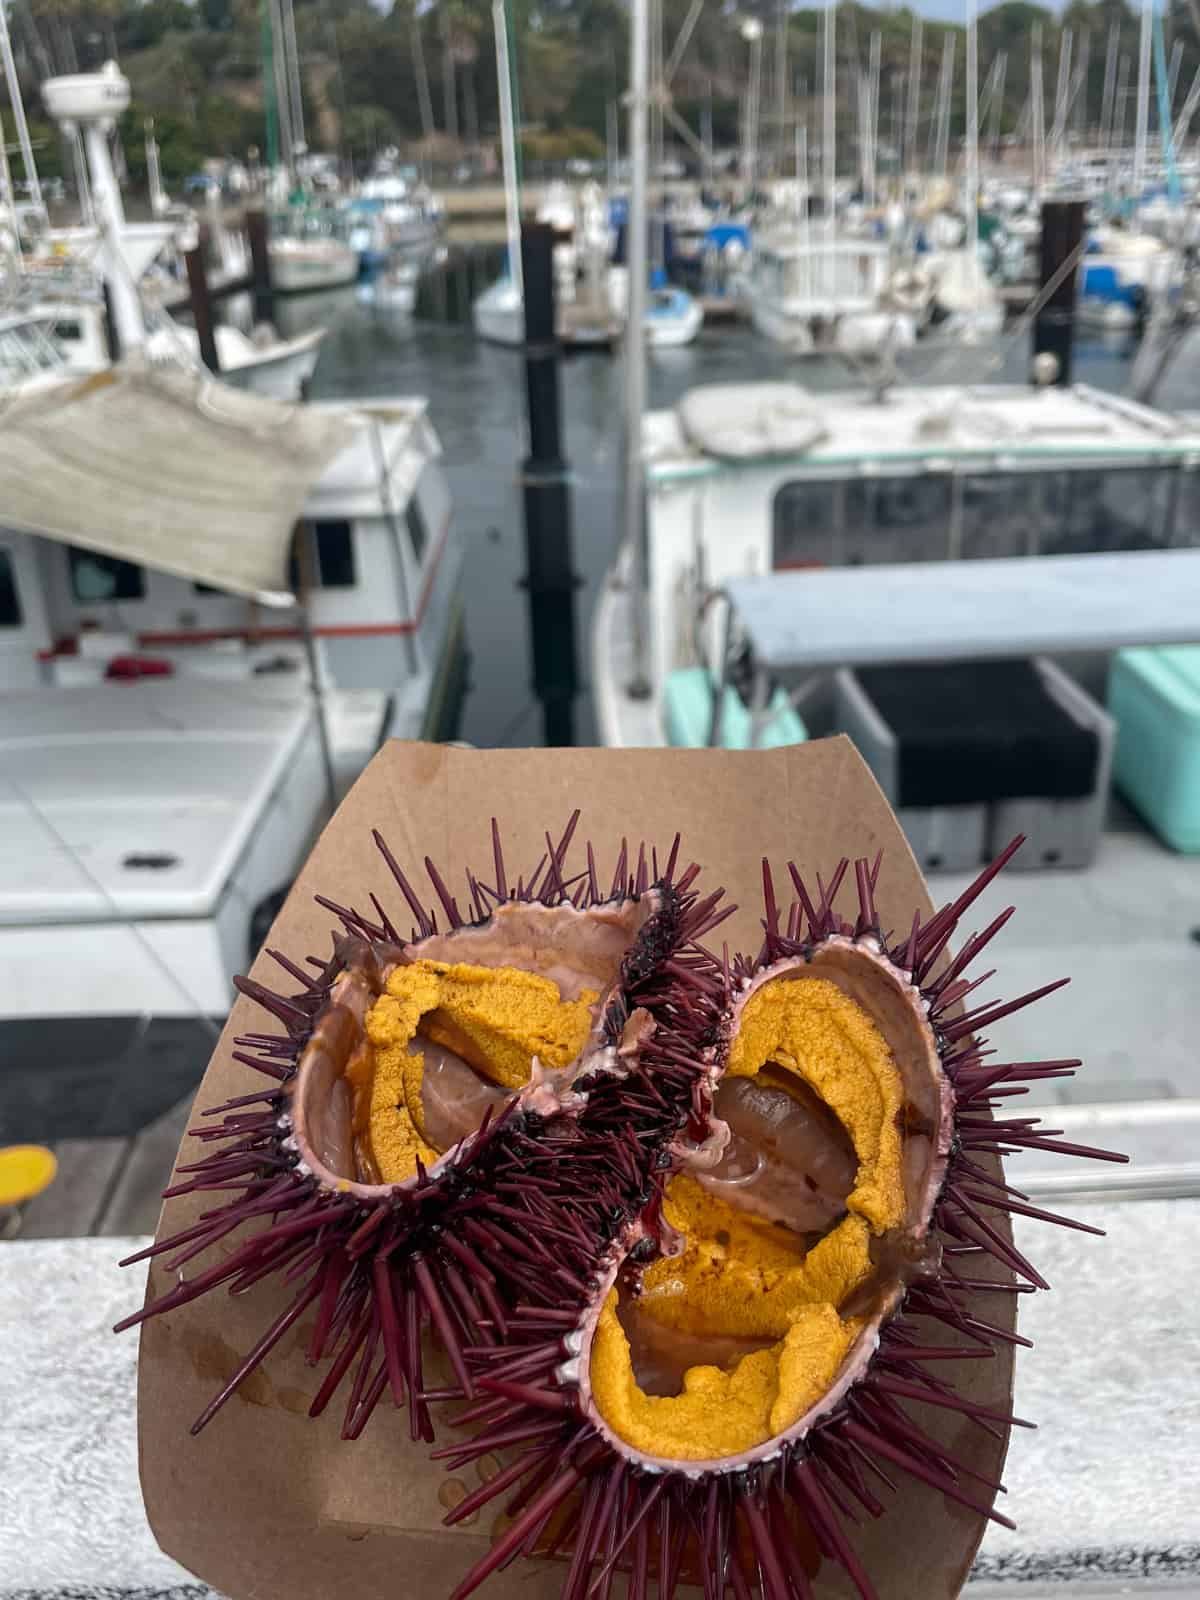 A photo of live uni sashimi cracked open in the shell on the Santa Barbara dock.